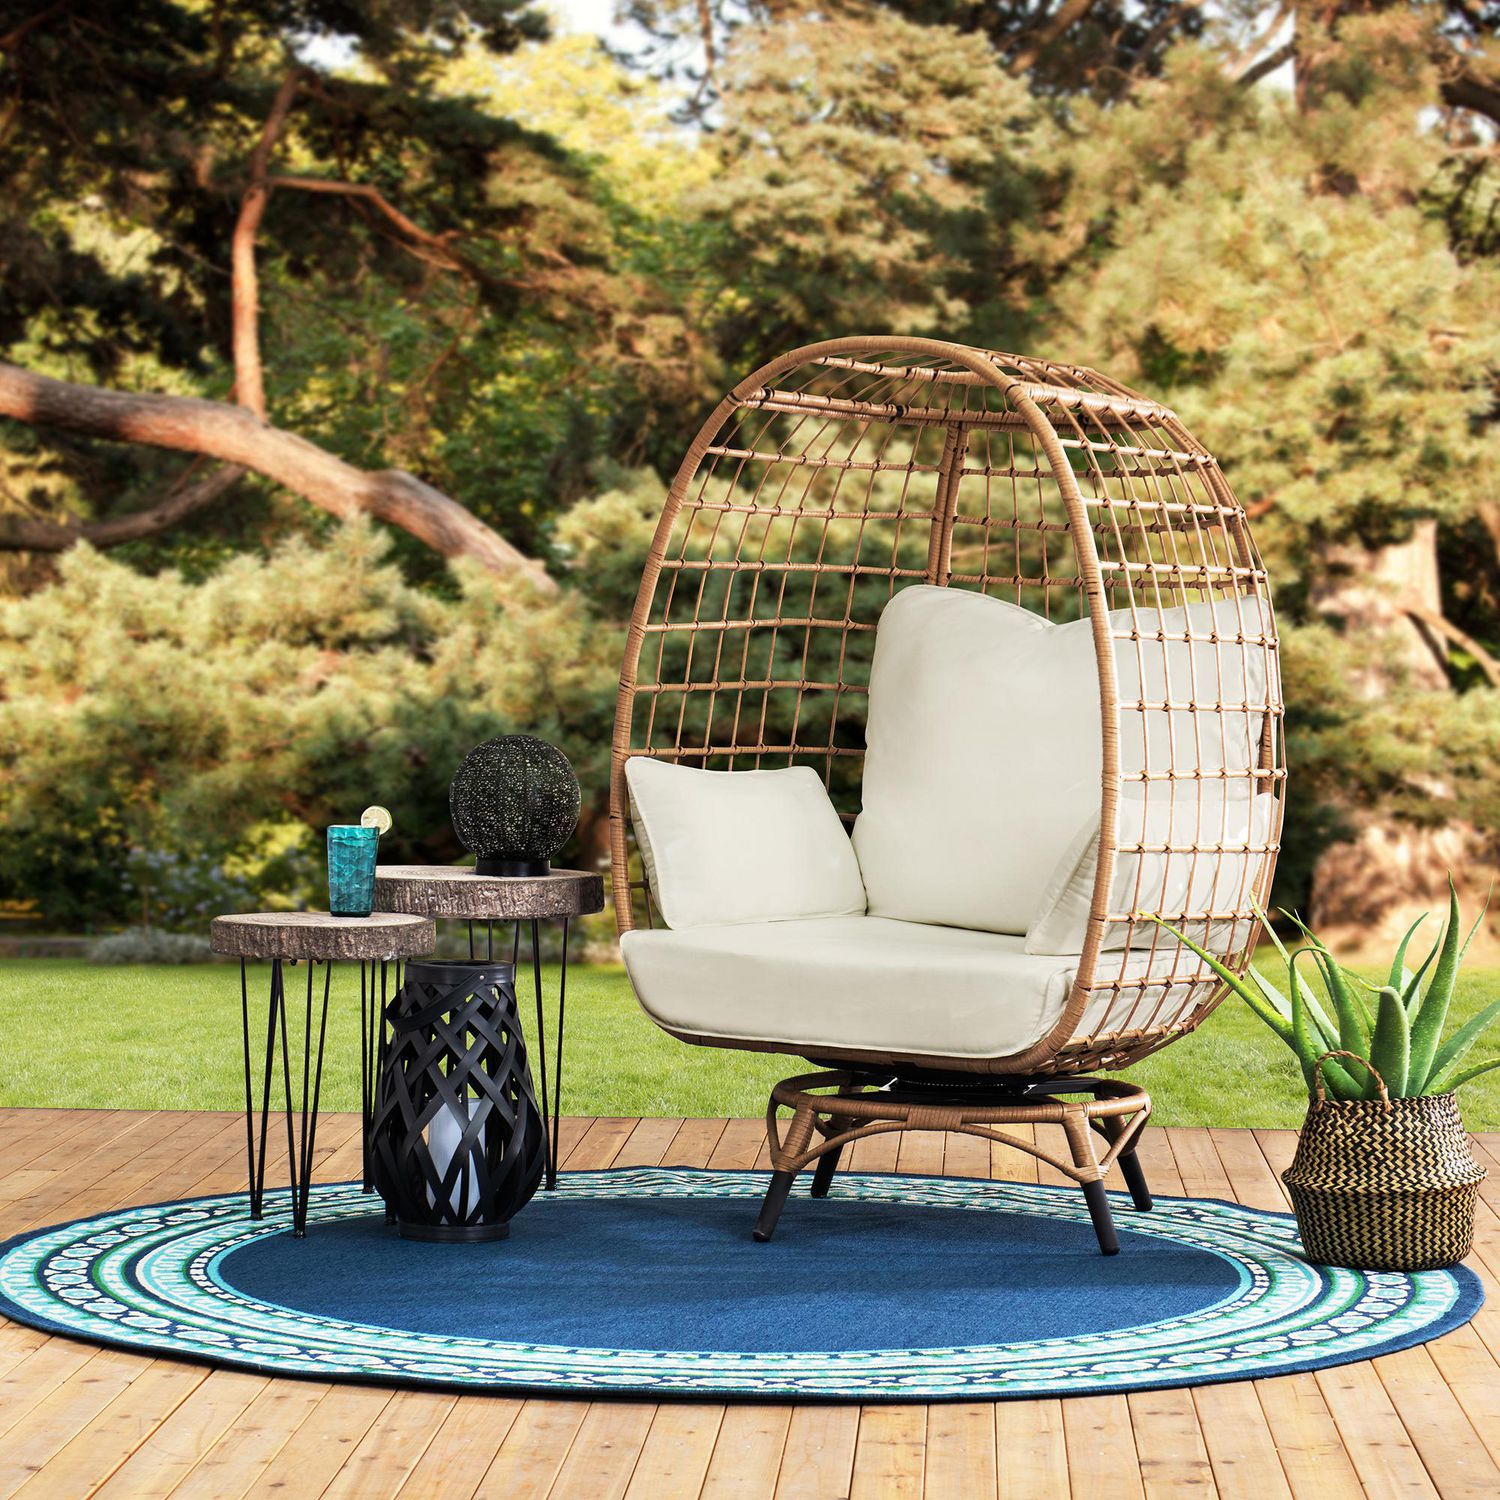 MAIA 1 Seater synthetic fibre garden swing seat By Kettal